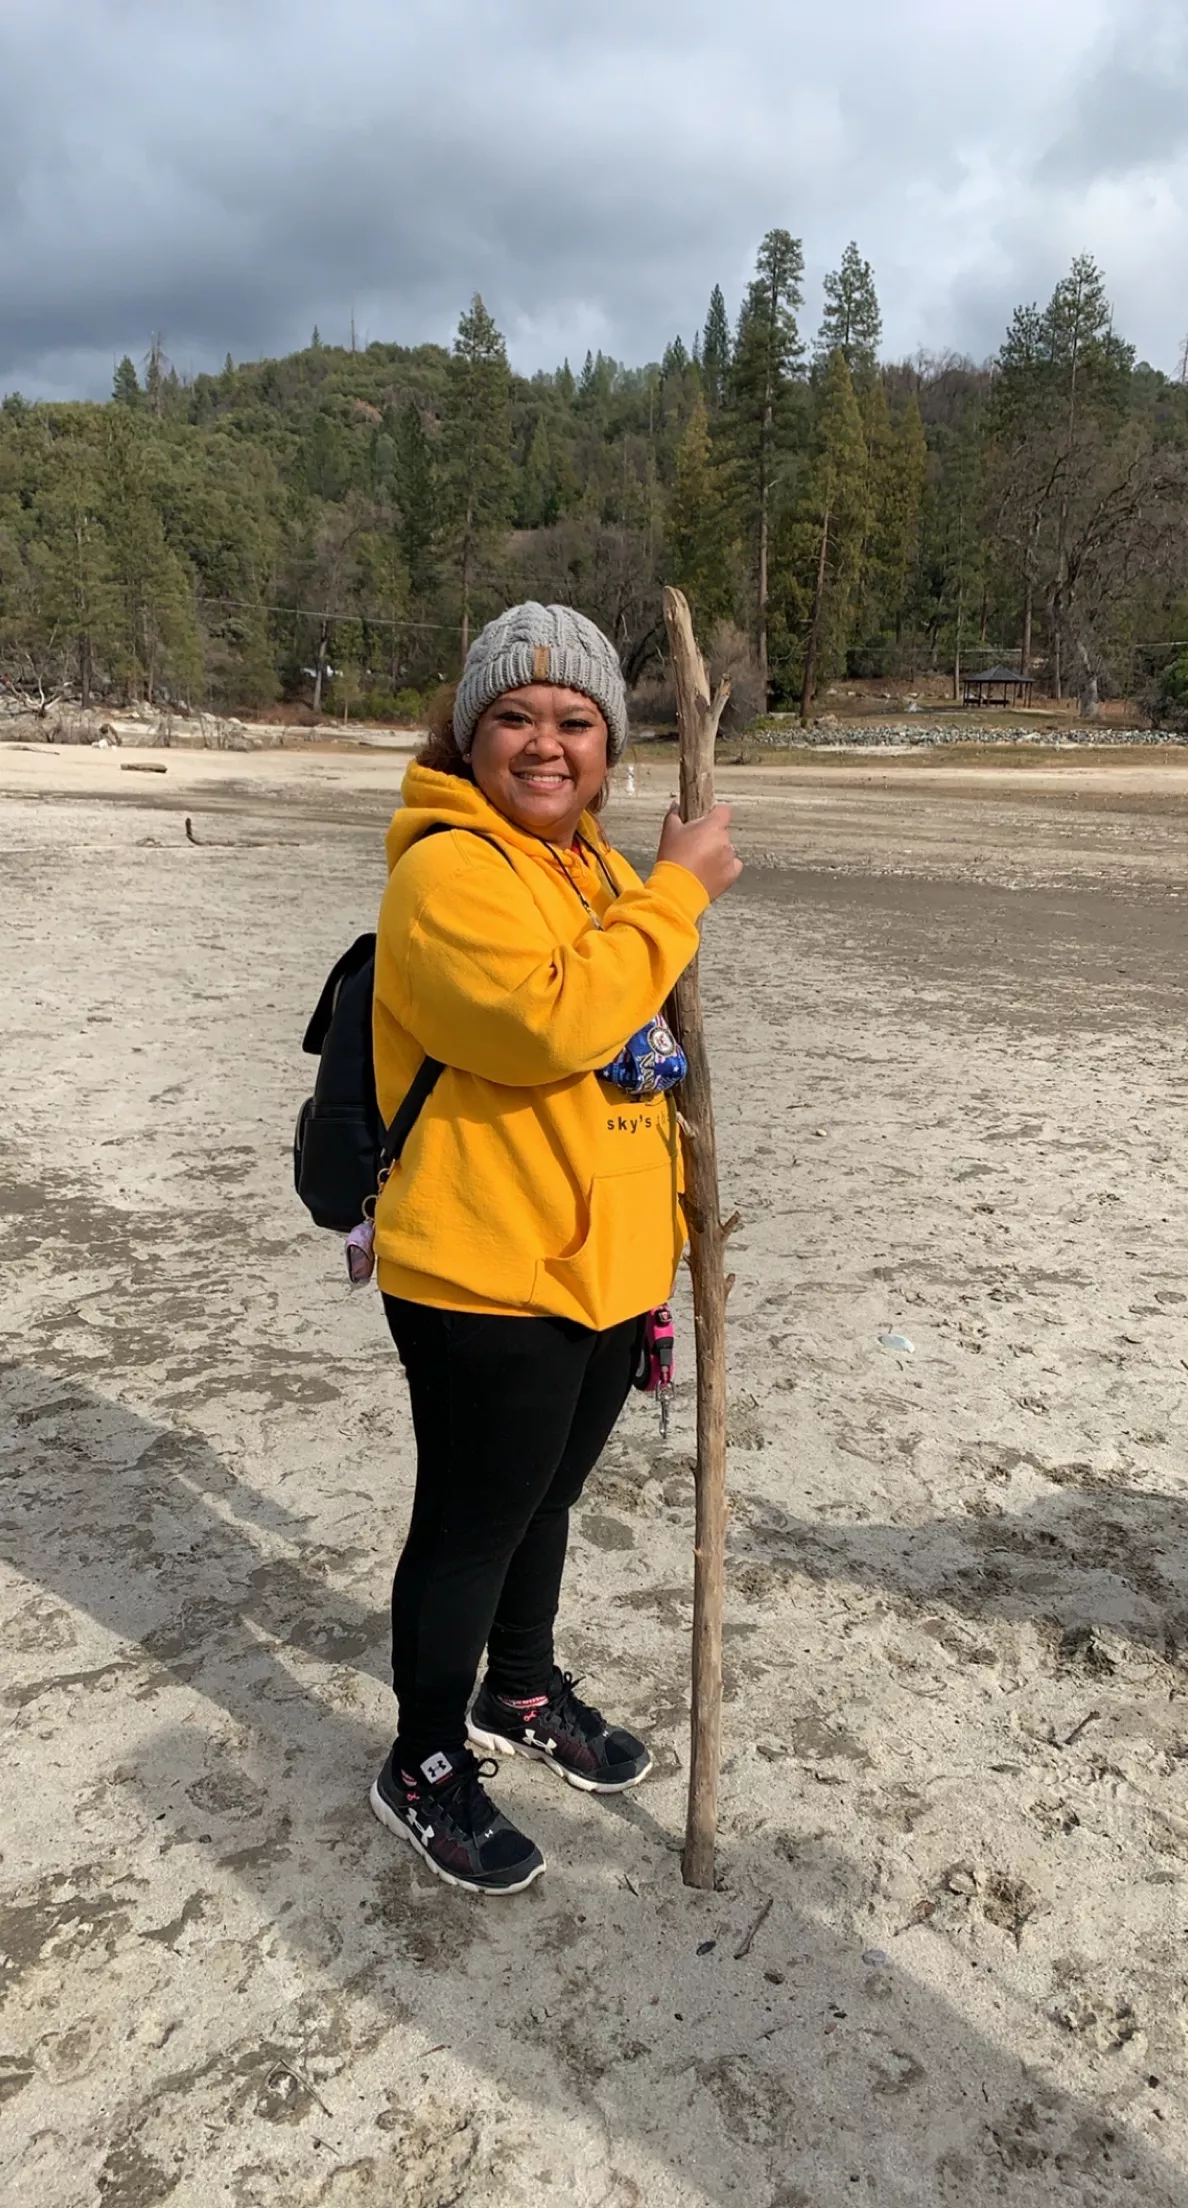 Larafae Santos, seen here hiking on a sandy area with conifer trees in the background. She is dressed in a yellow sweatshirt, black pants, a gray hat, backpack, and is holding a walking stick. 